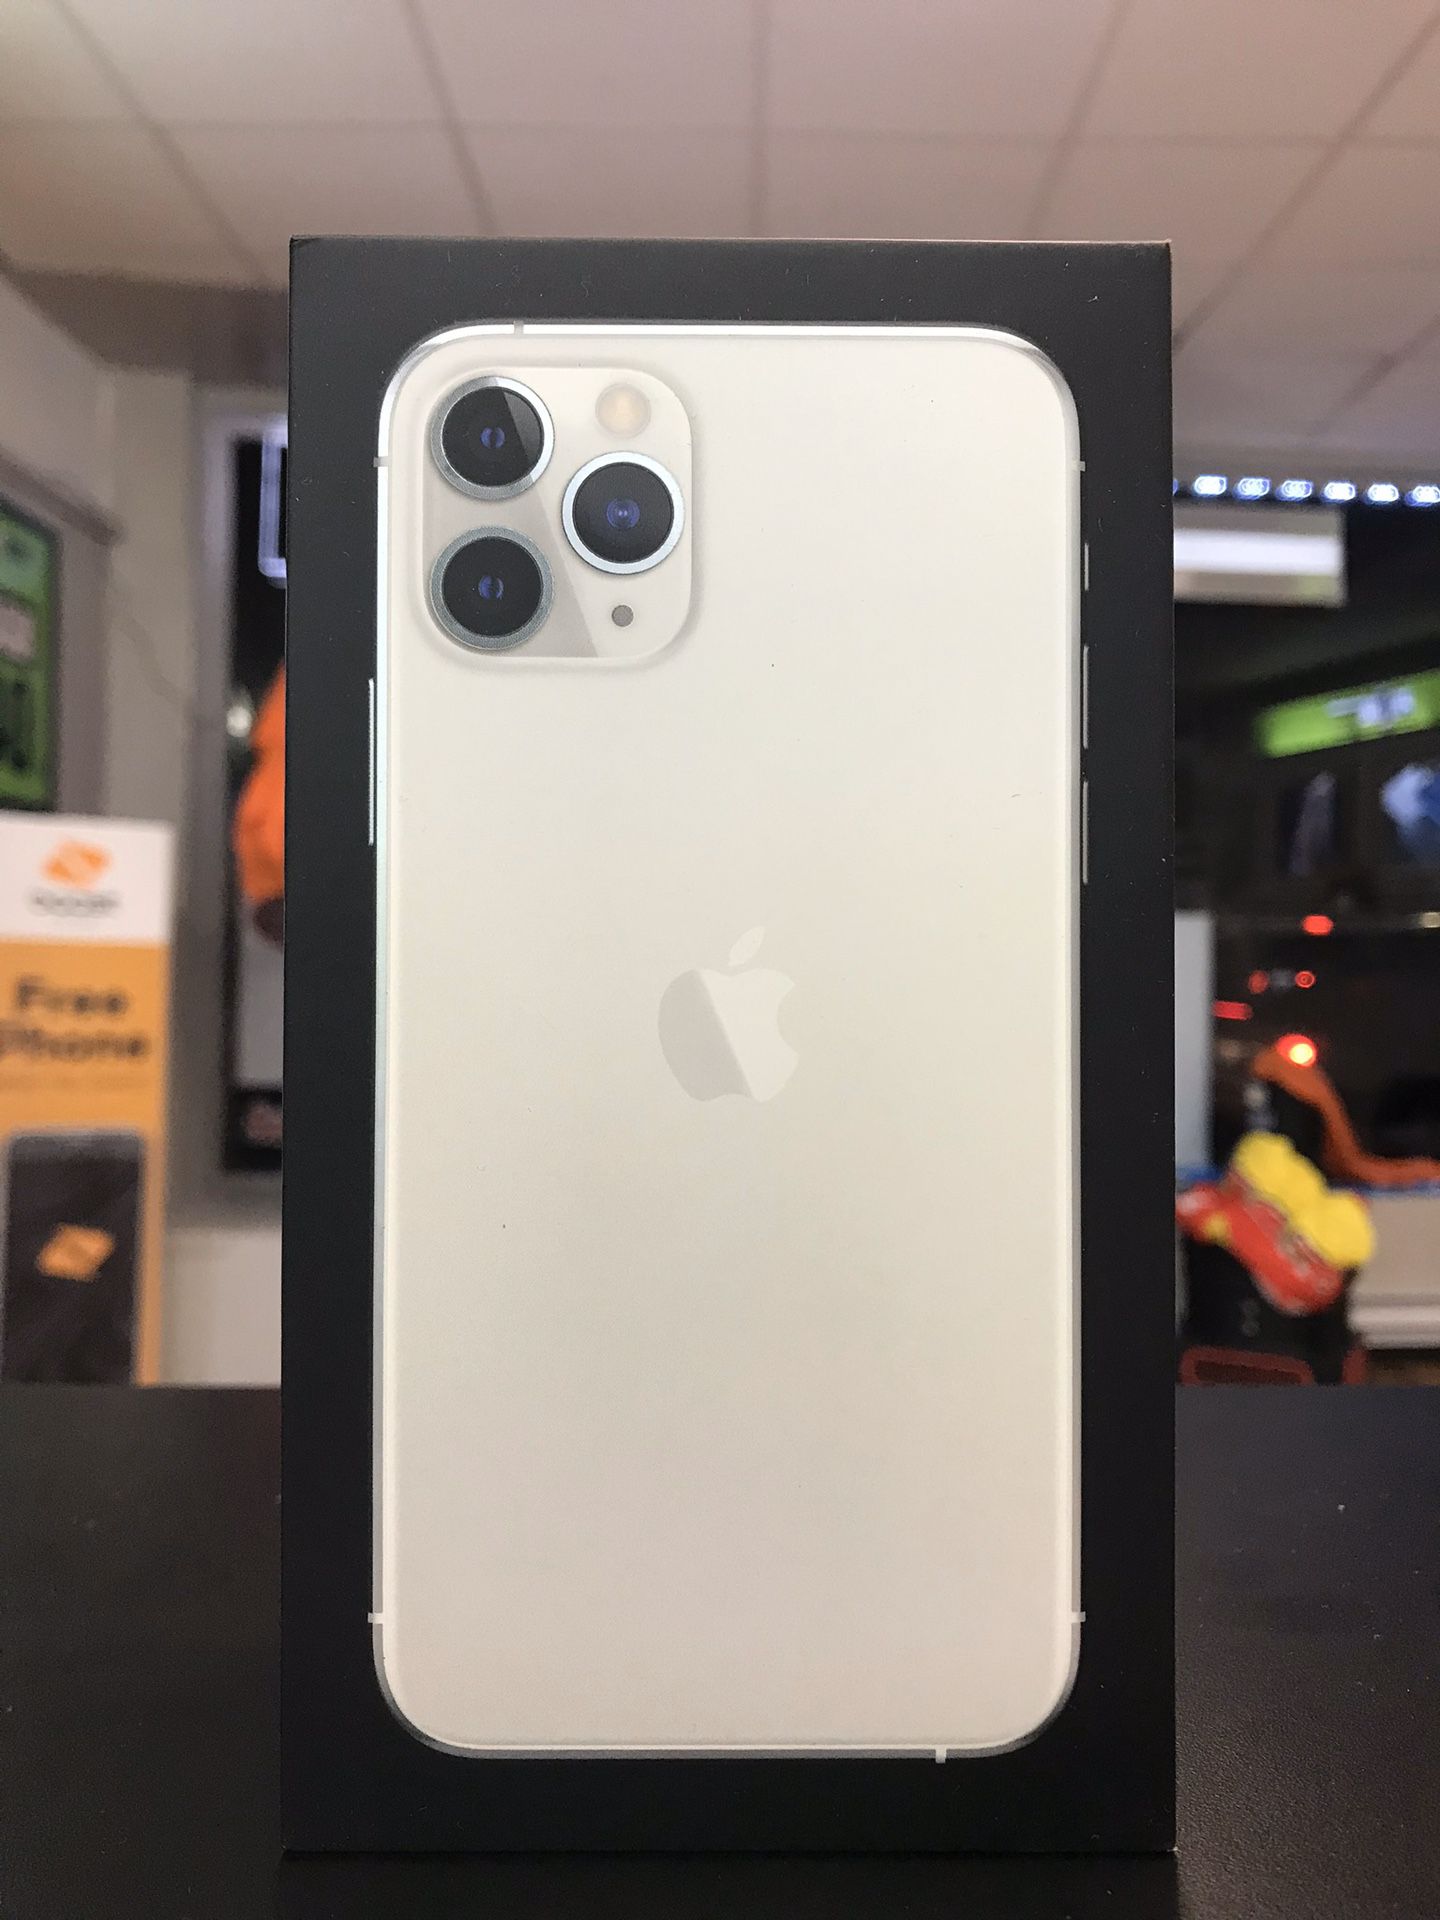 New Unlocked iPhone 11 Pro Max - Finance with only $50 down today!